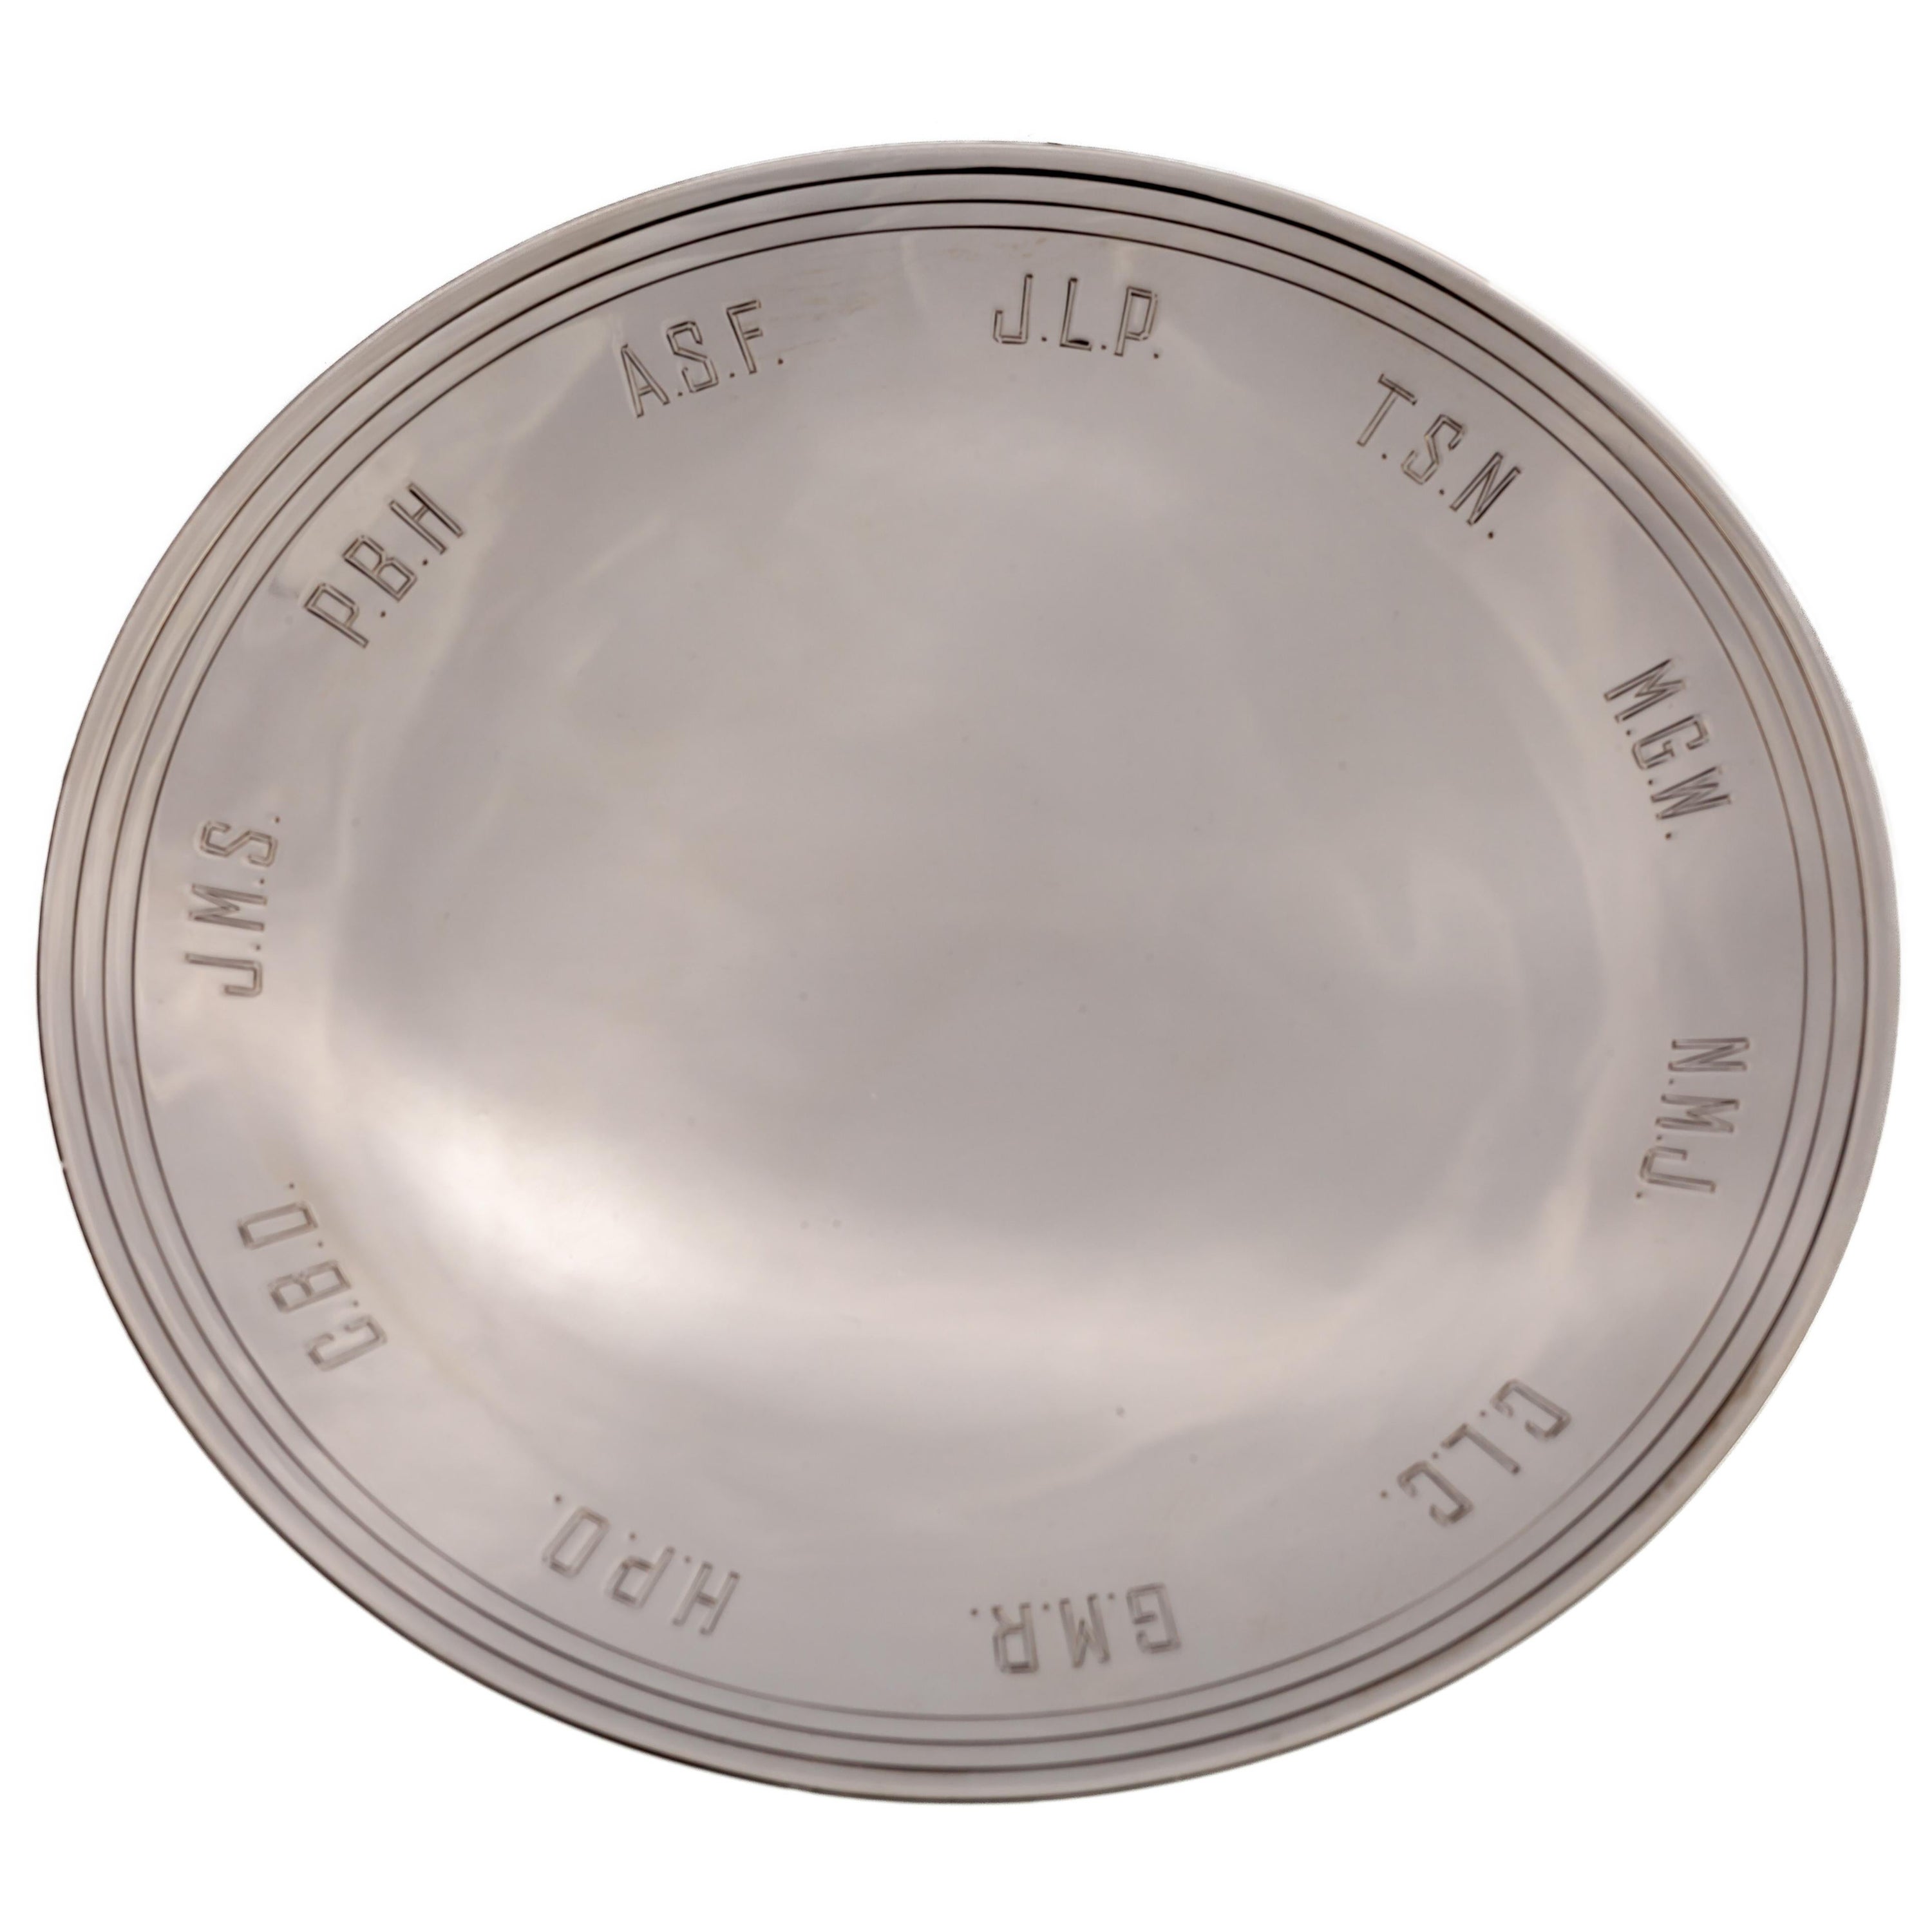 Tiffany & Co. Makers Sterling Silver Windham 8" Footed Cookie Plate 23117 en vente